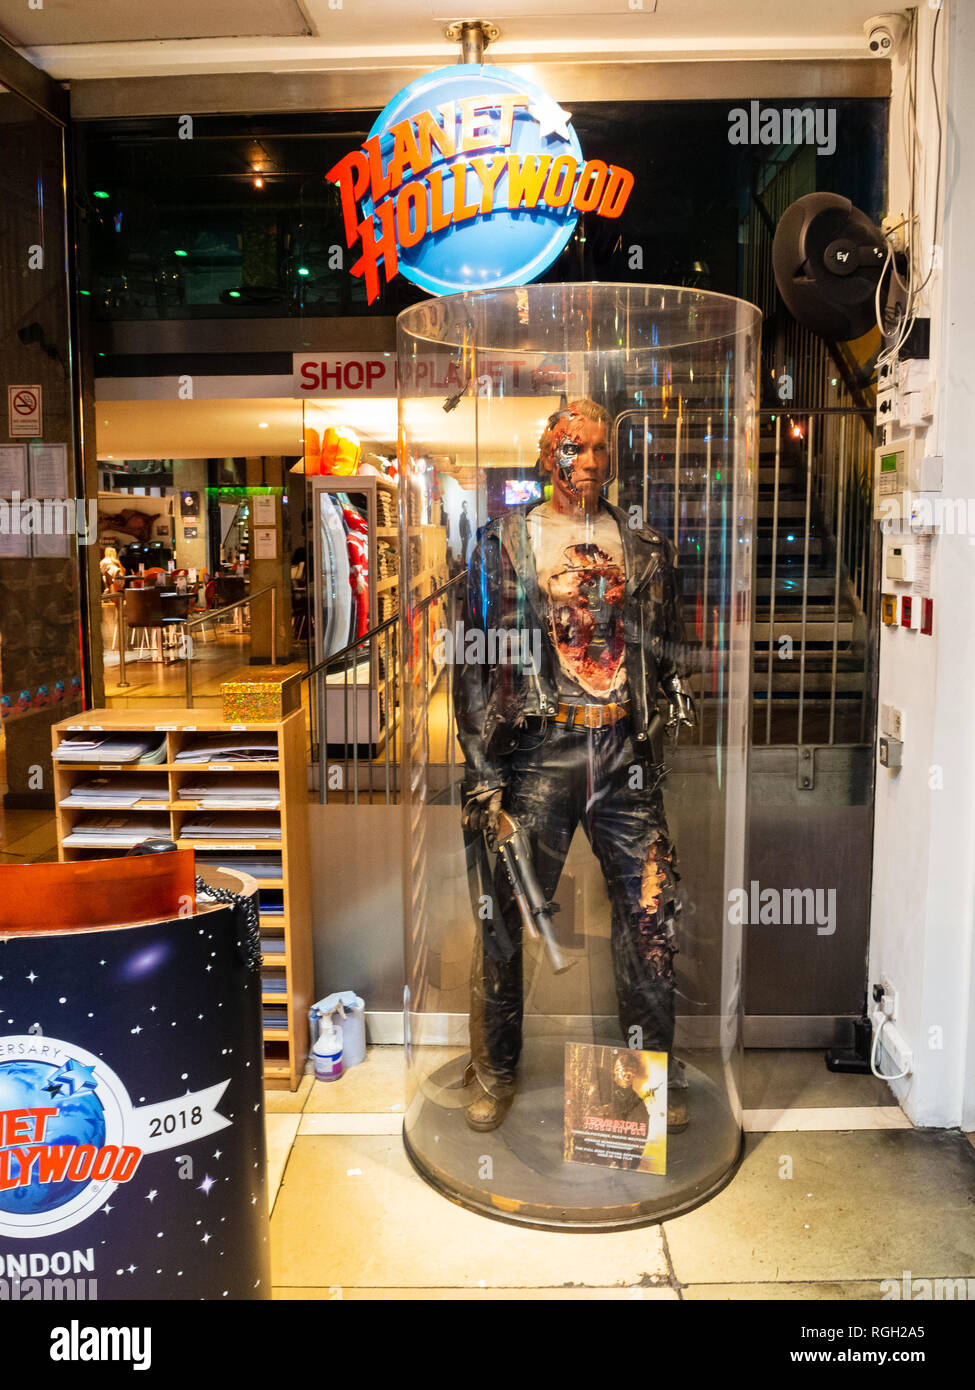 London,UK - January 26th 2019: Planet Hollywood restaurant in London. The famous Terminator figure inside Hollywood themed restaurant chain Stock Photo